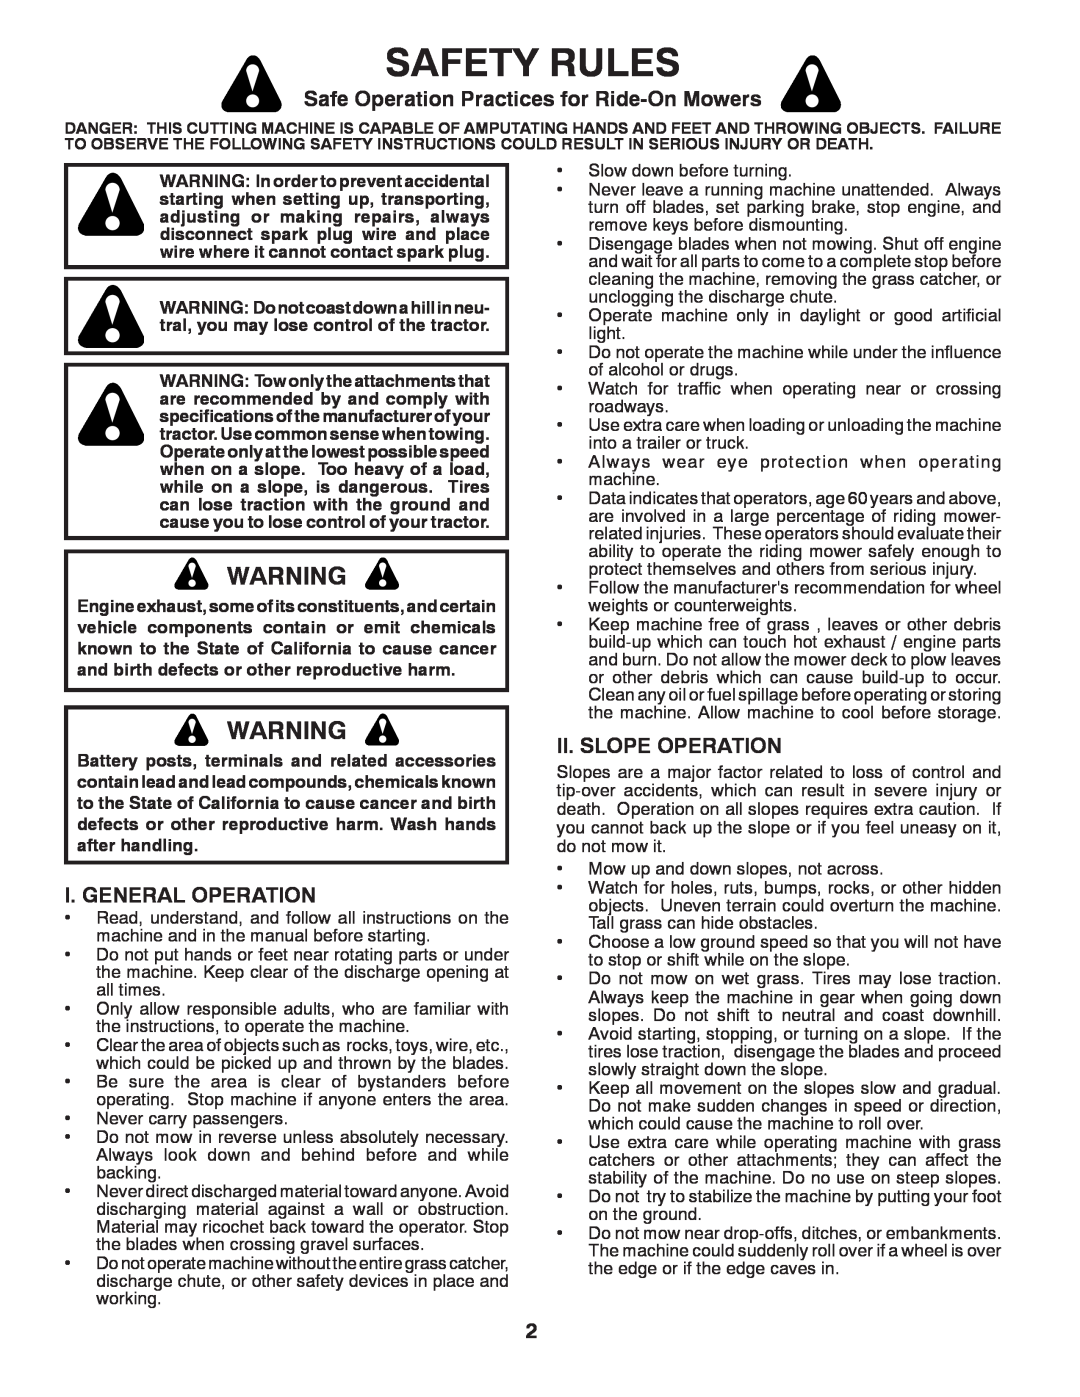 Weed Eater 435073 Safety Rules, Safe Operation Practices for Ride-On Mowers, I. General Operation, Ii. Slope Operation 